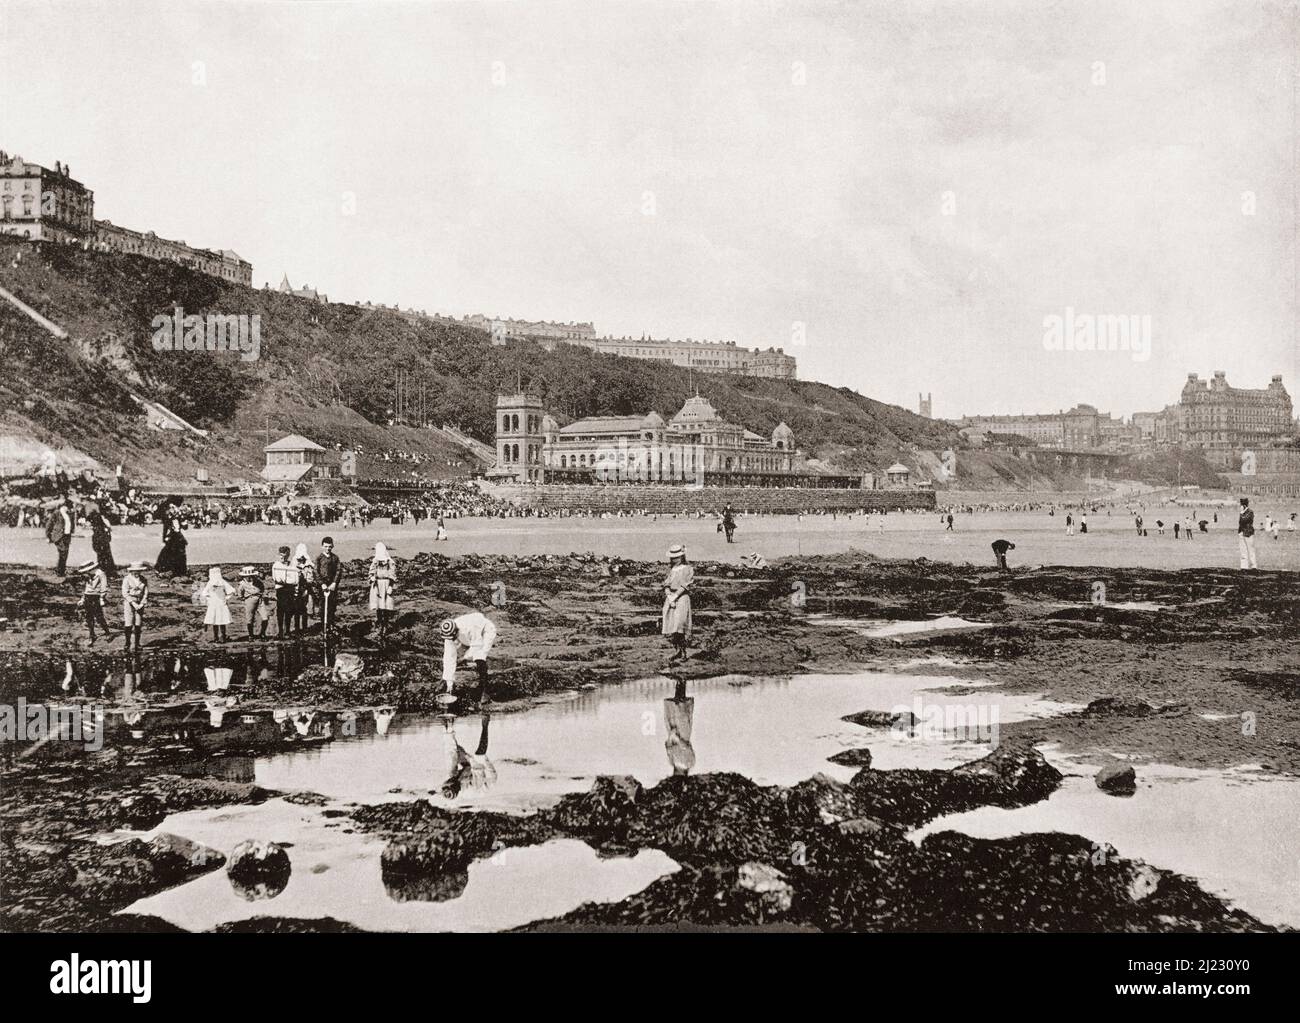 View from the rocks of South Bay and the Spa, Scarborough, North Yorkshire, England, seen here in the 19th century. From Around The Coast,  An Album of Pictures from Photographs of the Chief Seaside Places of Interest in Great Britain and Ireland published London, 1895, by George Newnes Limited. Stock Photo